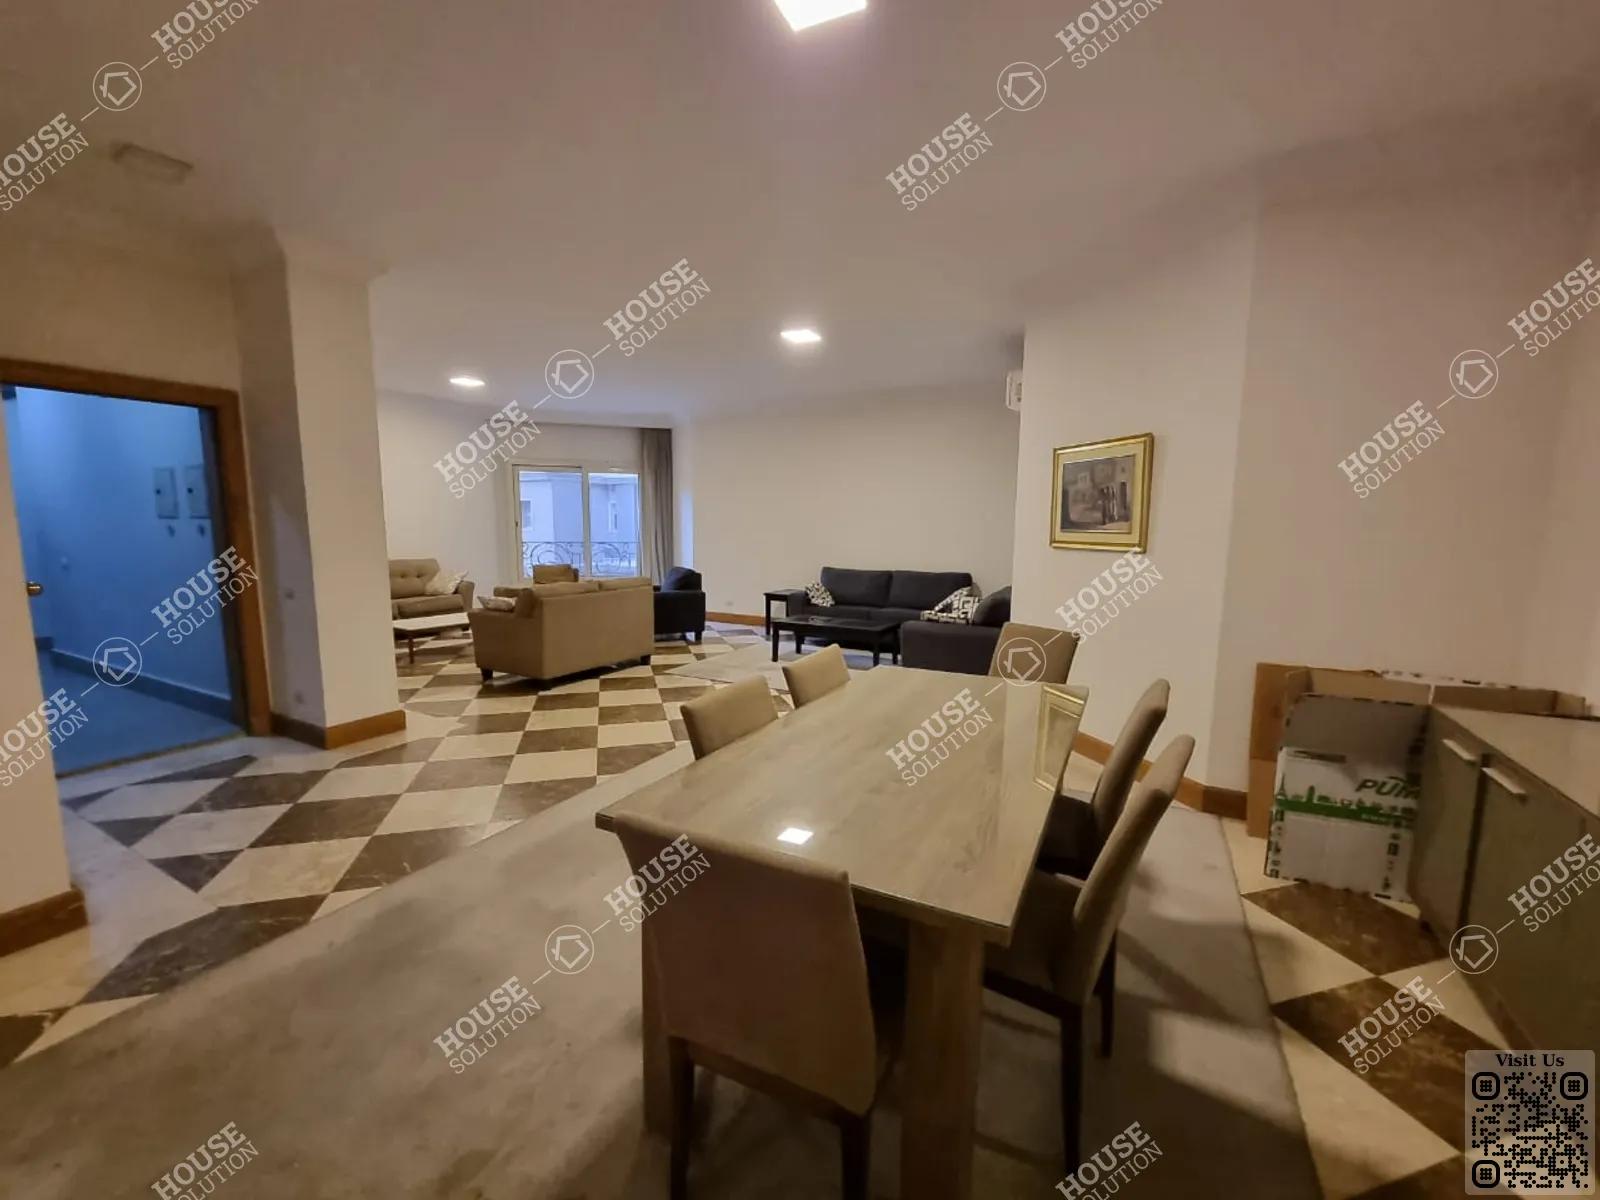 RECEPTION  @ Apartments For Rent In Maadi Maadi Sarayat Area: 250 m² consists of 4 Bedrooms 4 Bathrooms Modern furnished 5 stars #5340-0